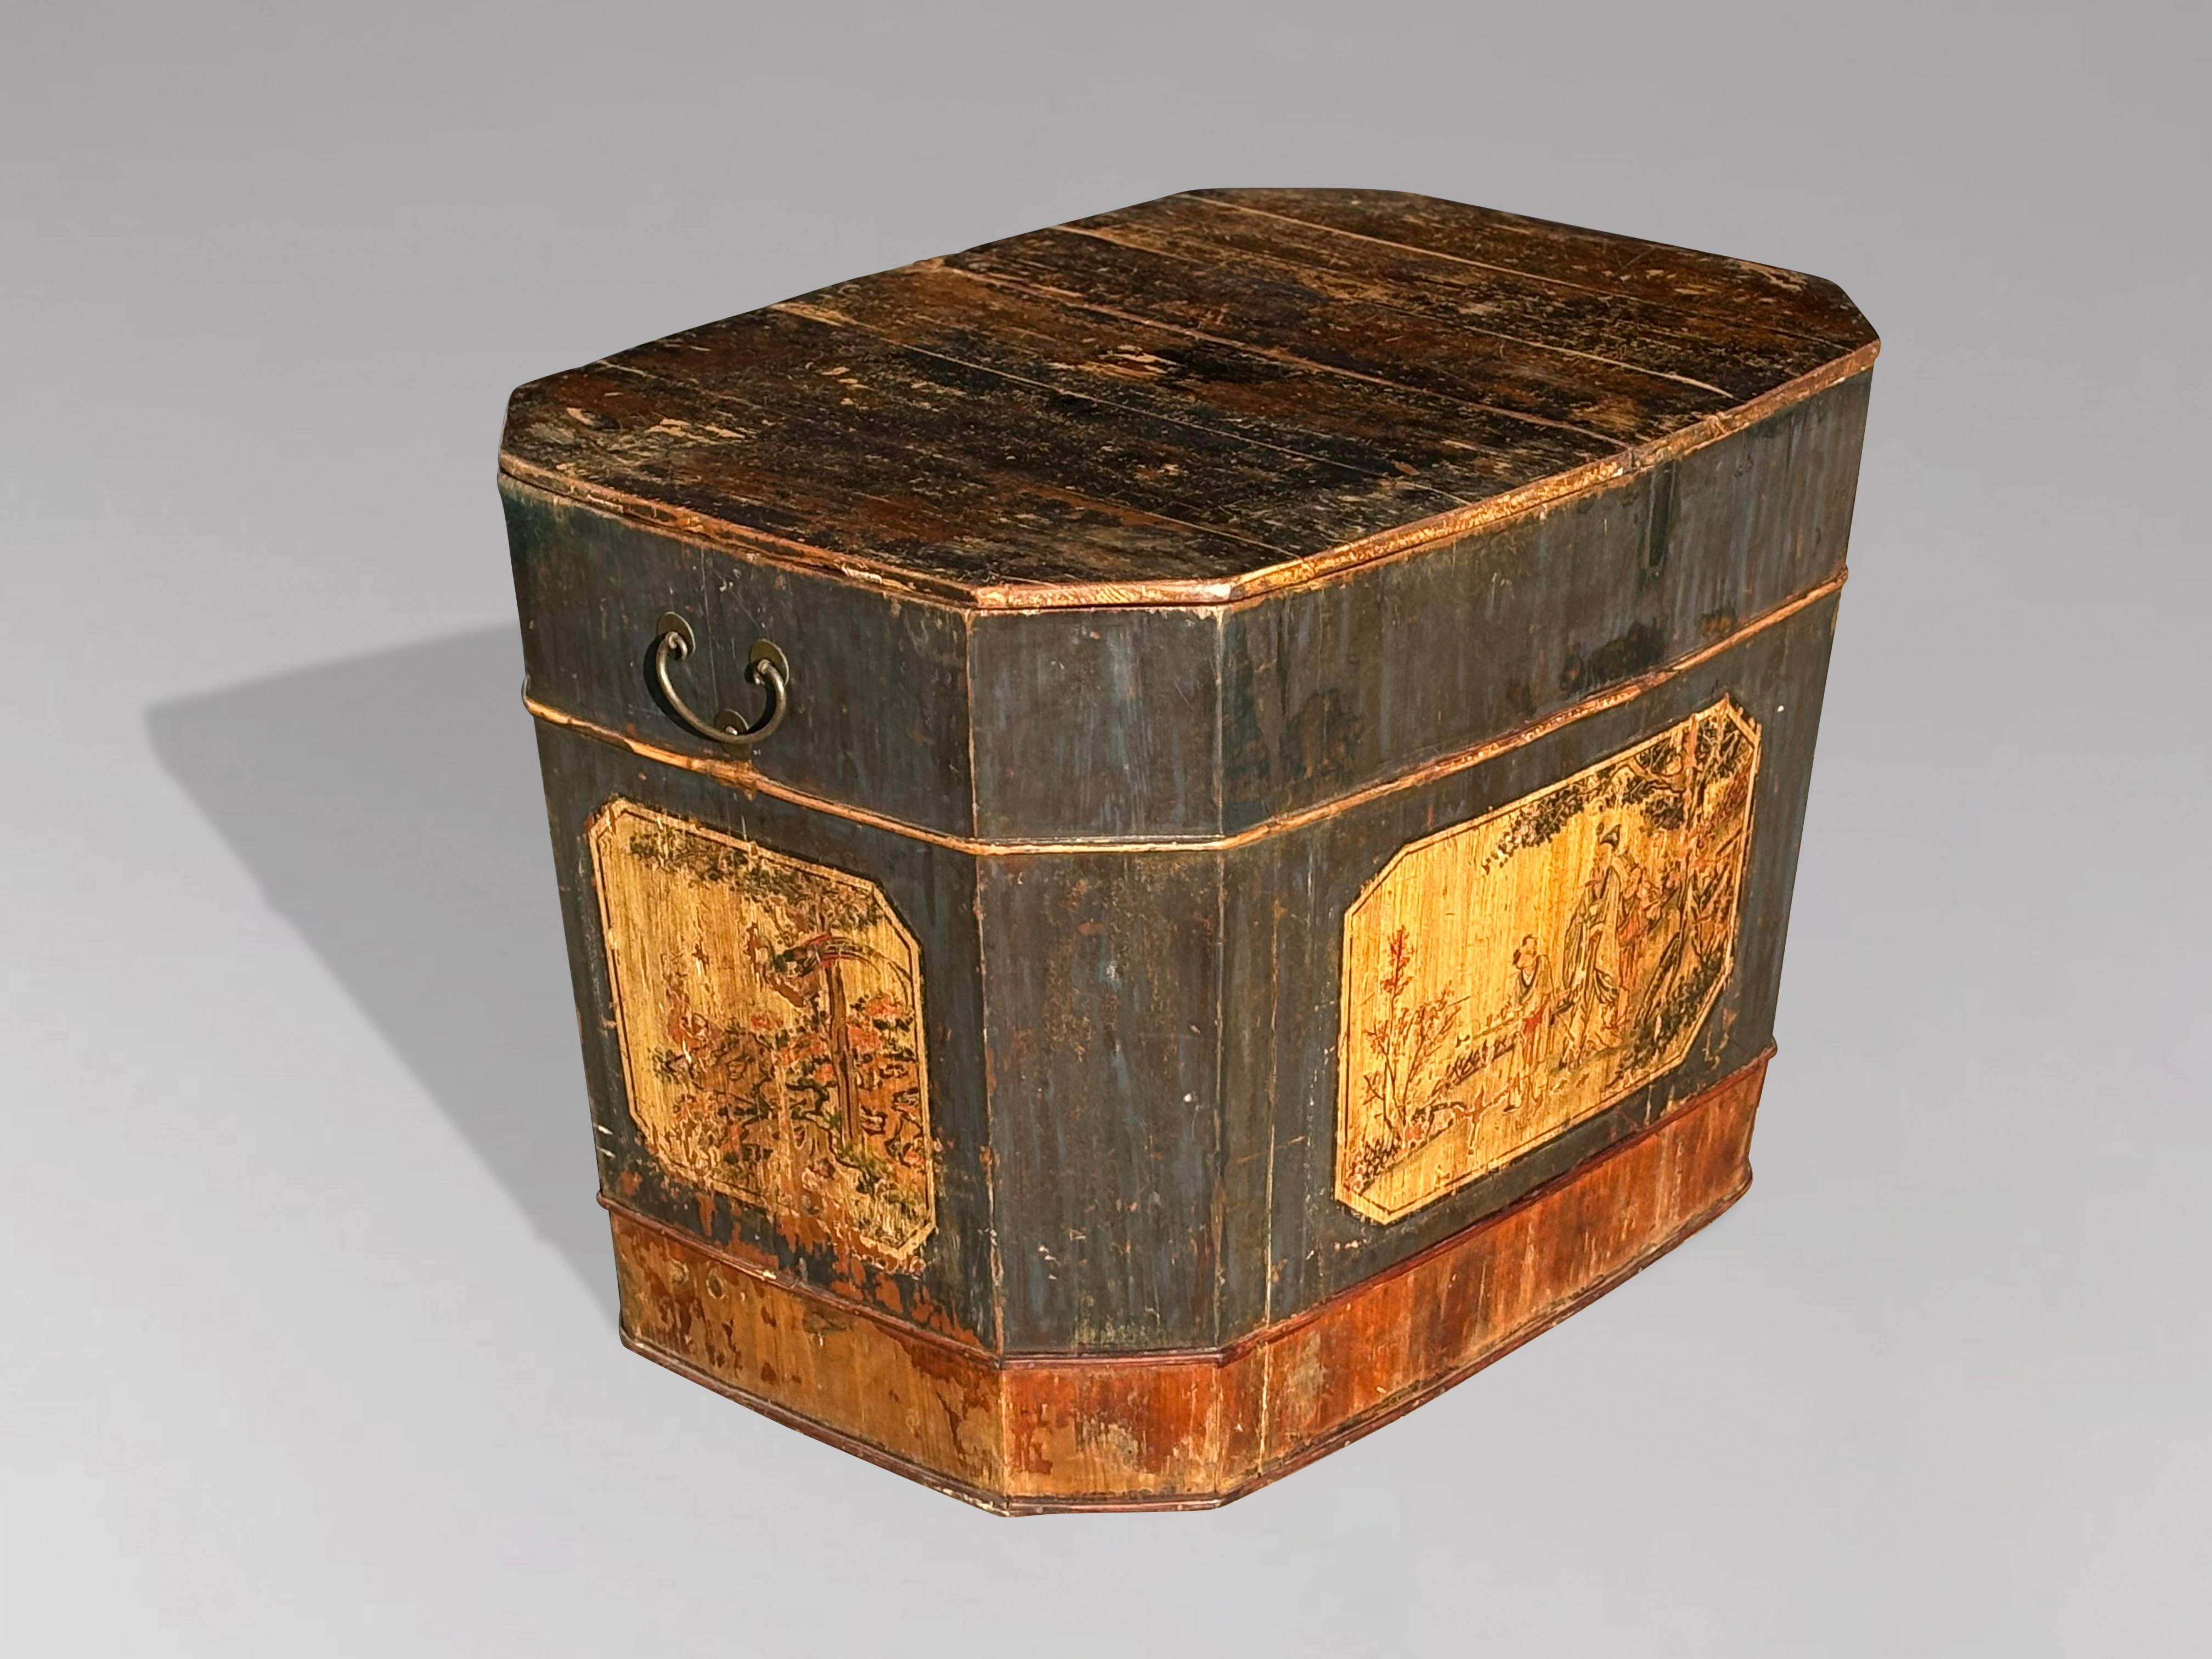 A very decorative 19th Century painted Chinese rice, grain chest or coffee table. Original painted finish depicting hand painted scenes of Chinese life. A lift off lid above canted corners, bamboo banding and a pair of patinated bronze carrying